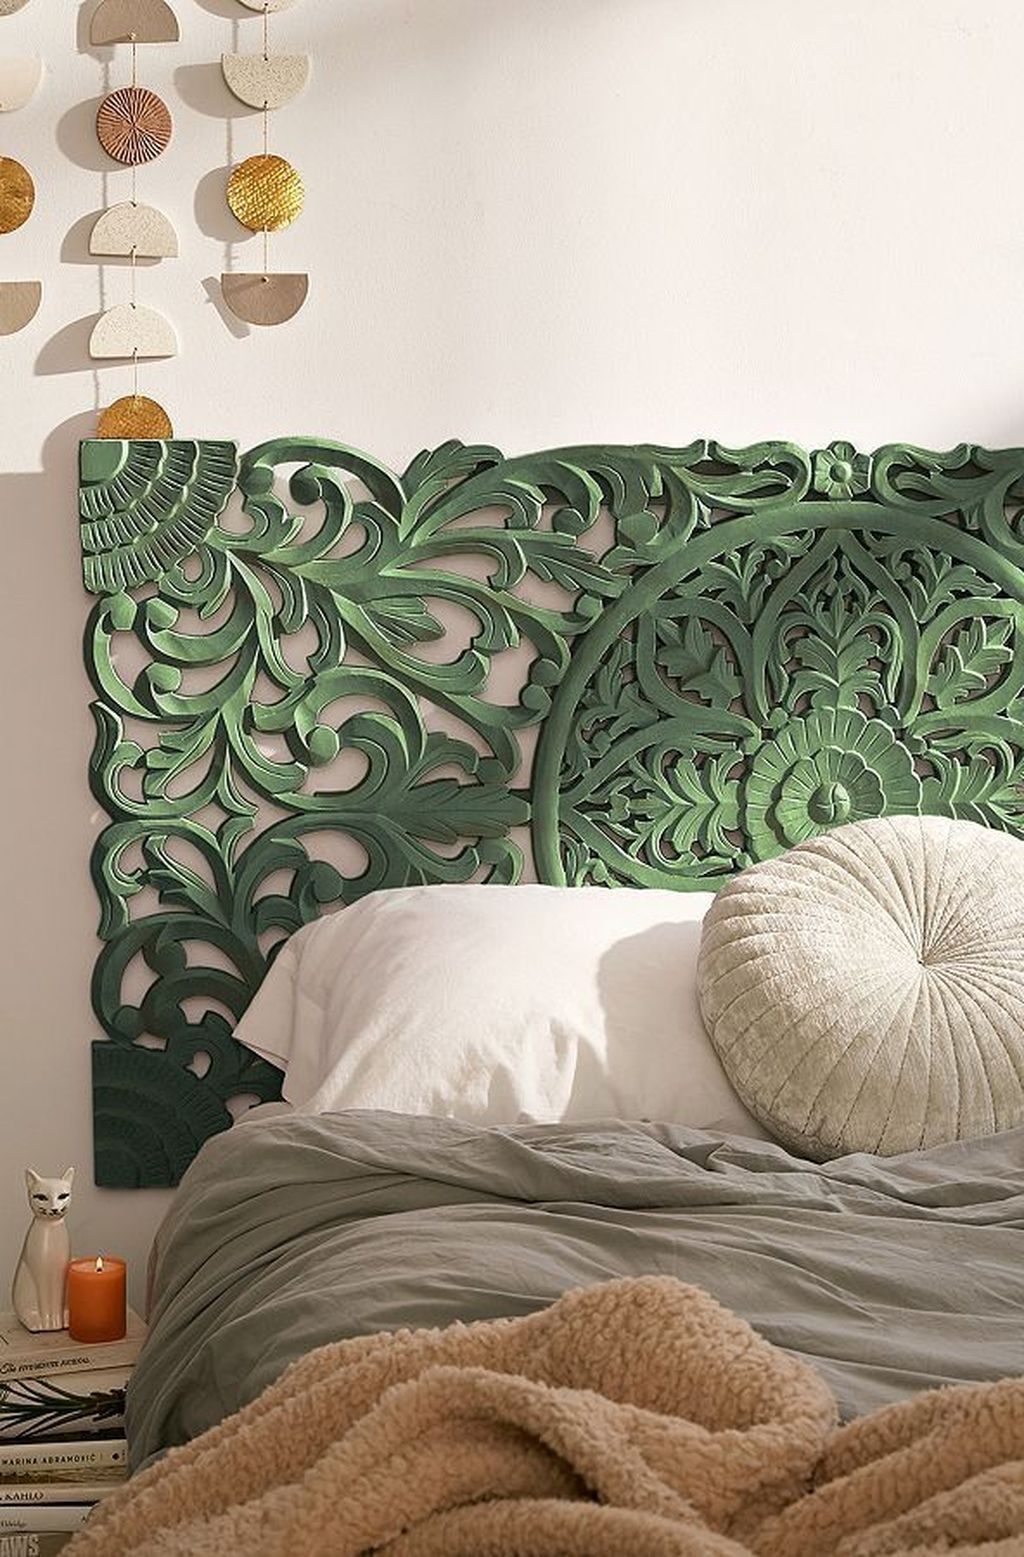 Incredible Headboard Design For Your Bedroom Inspiration 07